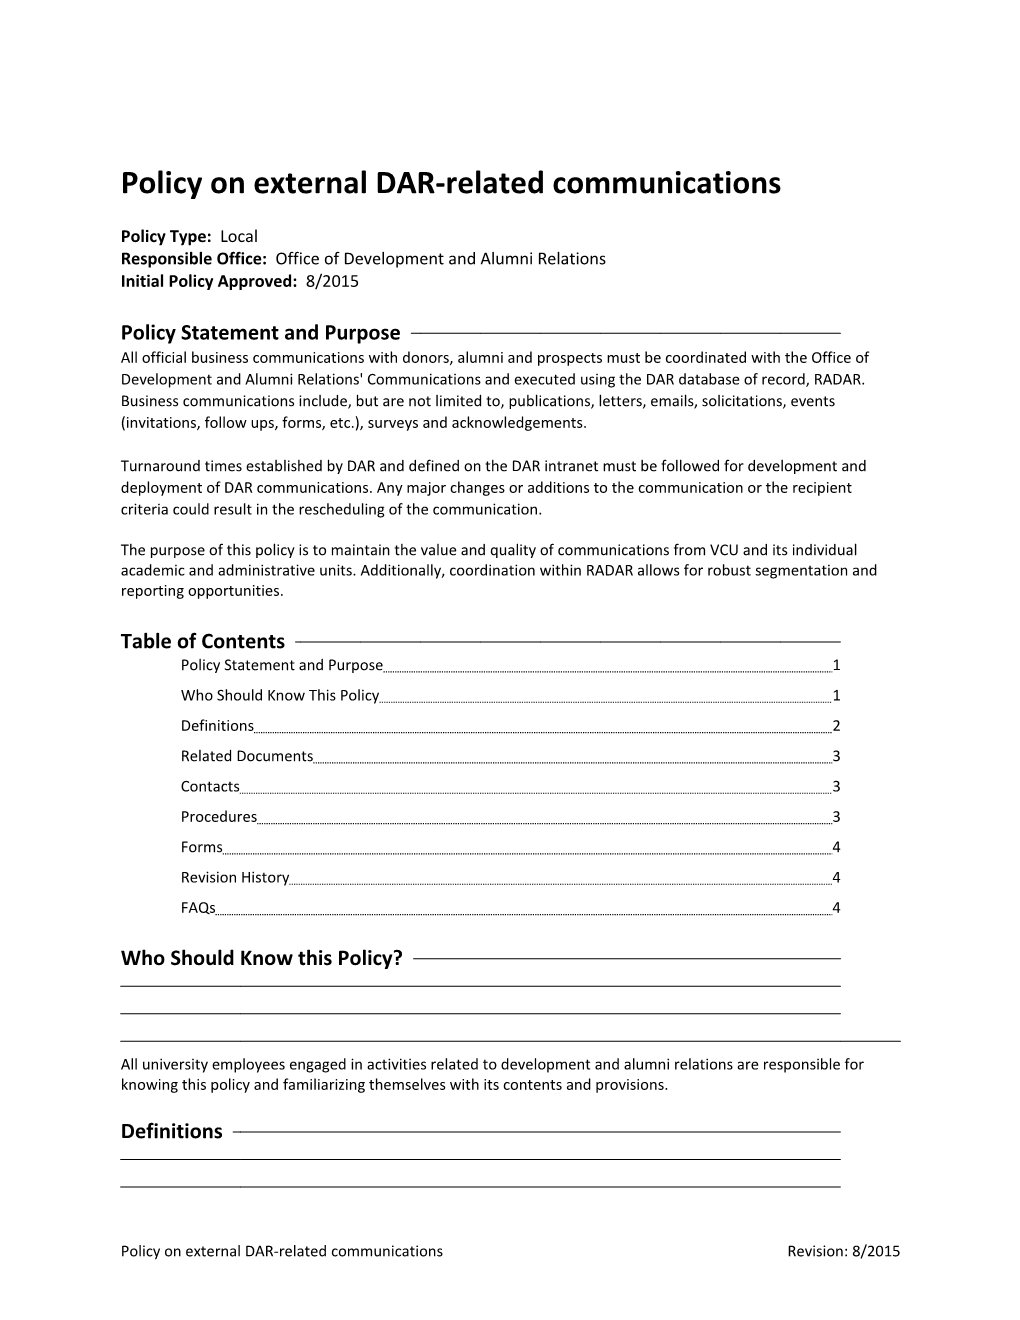 Policy on External DAR-Related Communications